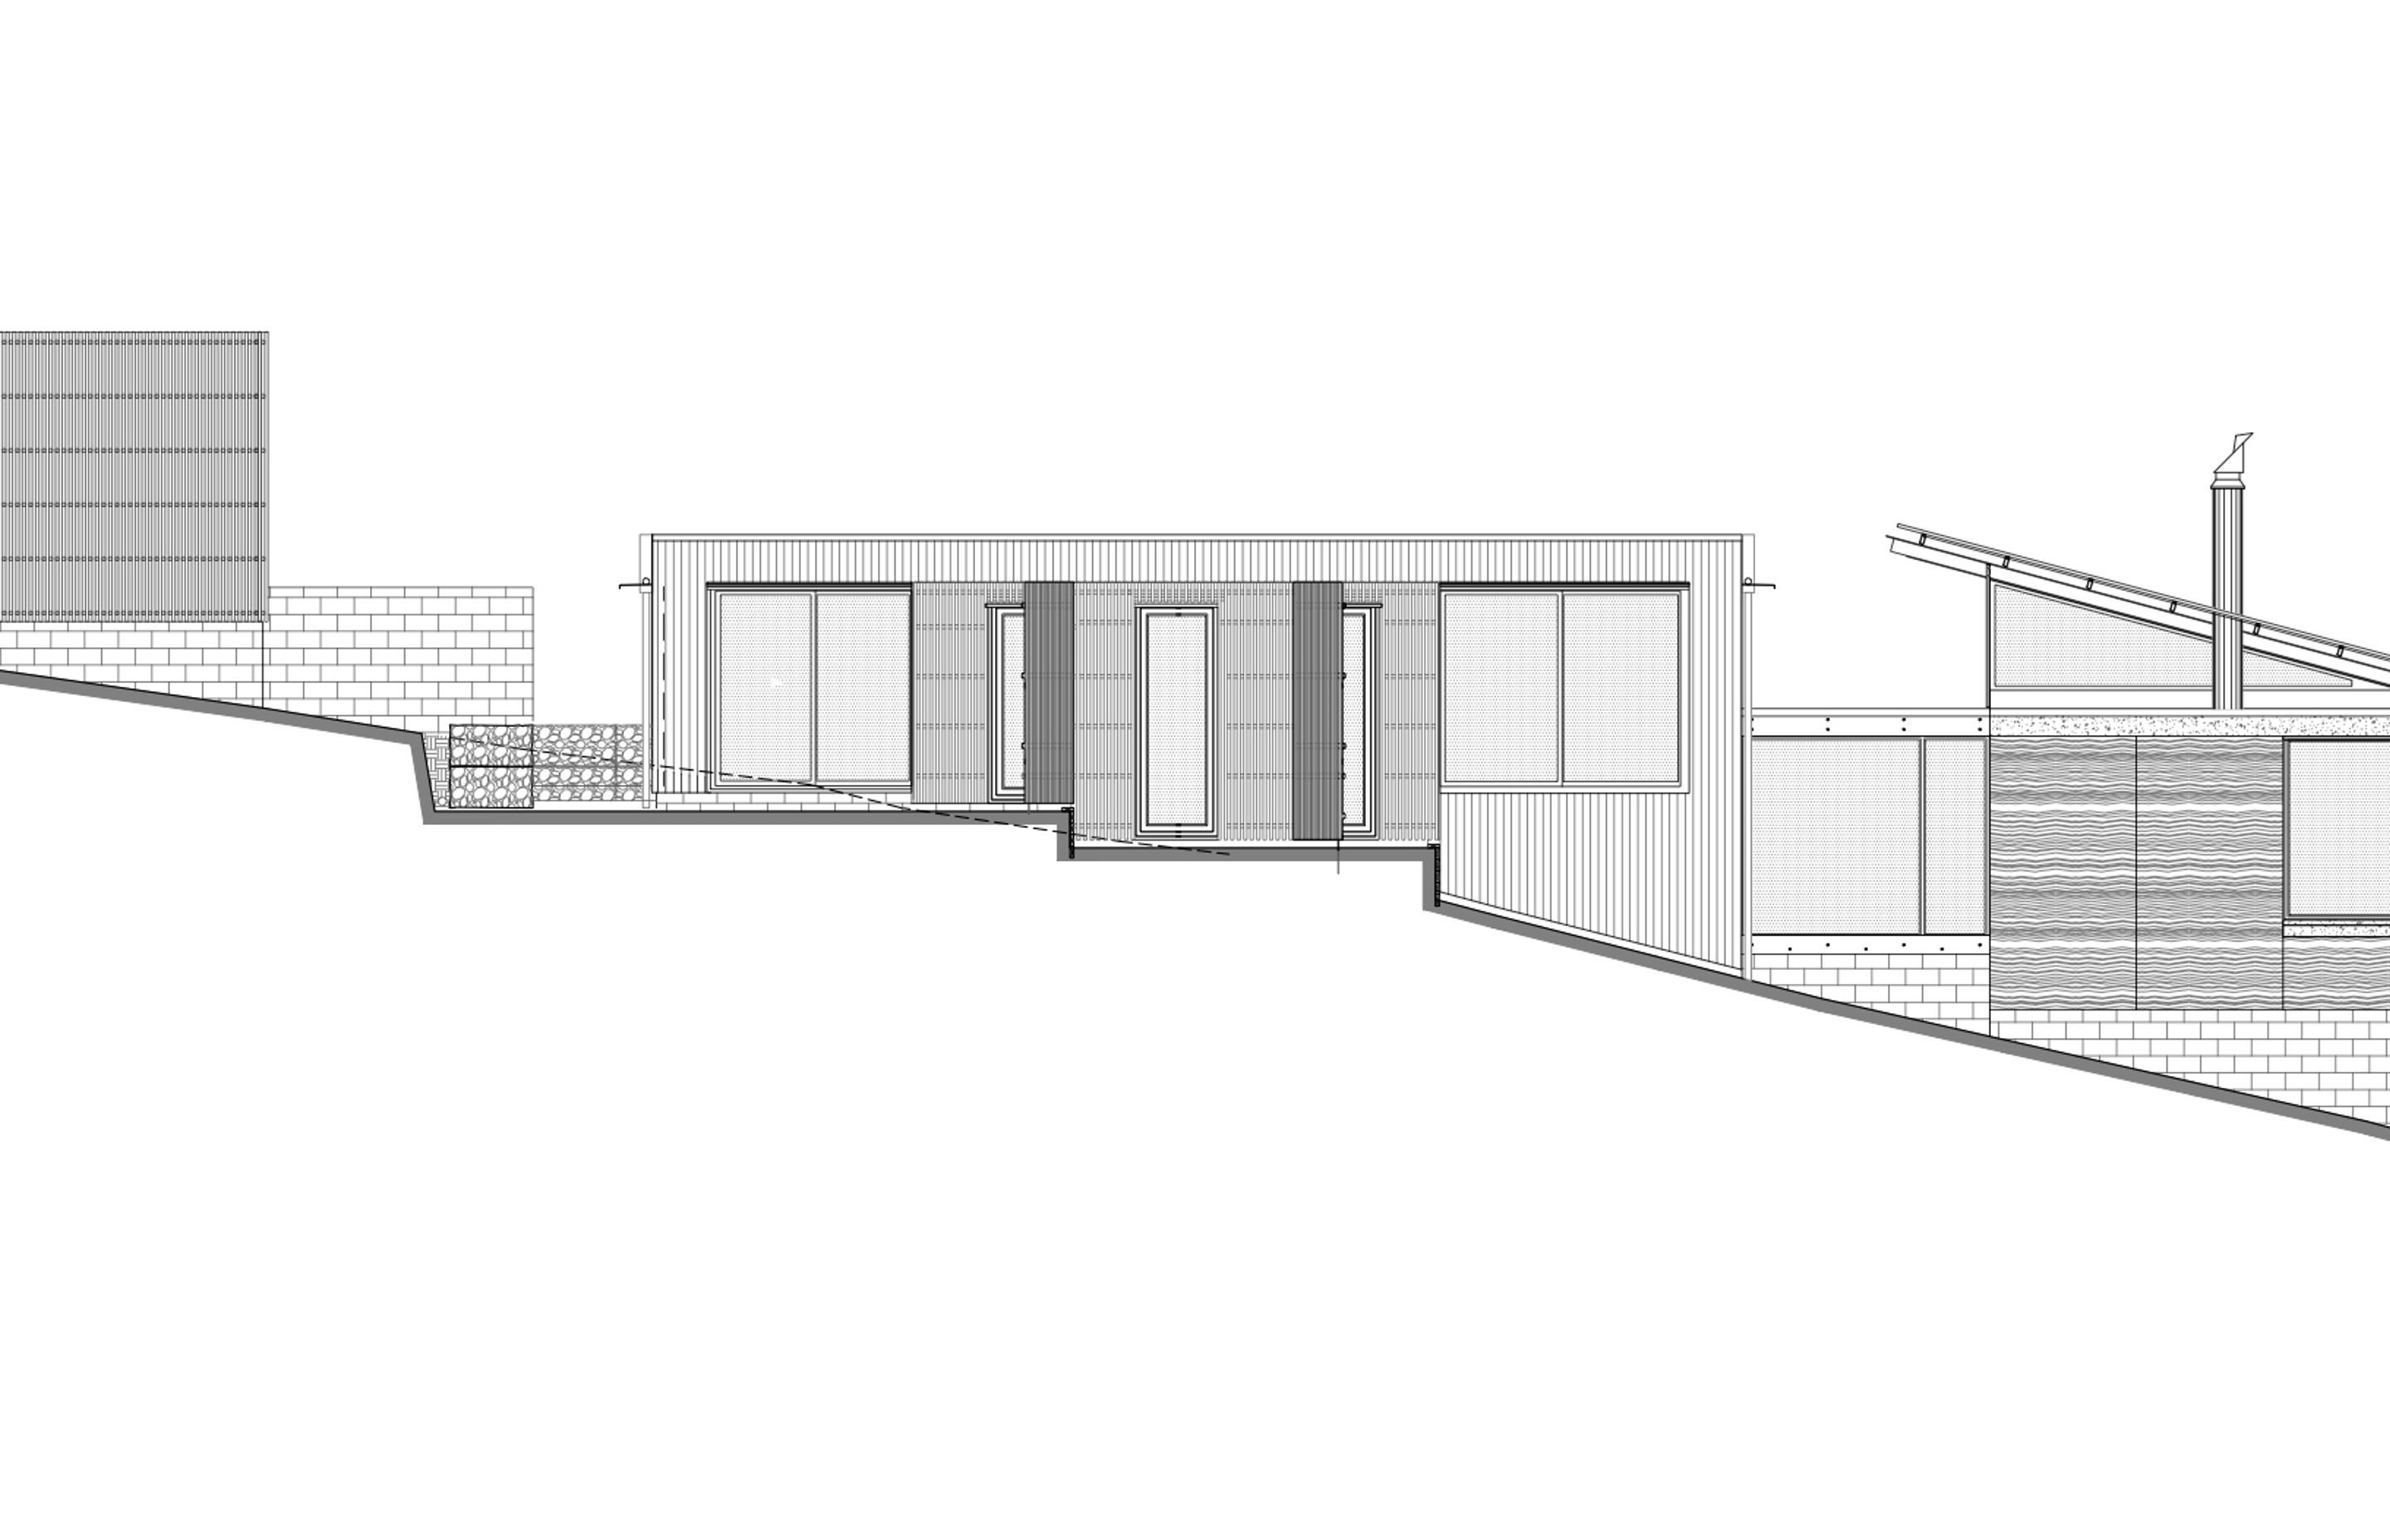 The south elevation of Tutukaka House, by Herbst Architects, with garage (left), bedroom wing (middle) and the living spaces (right).